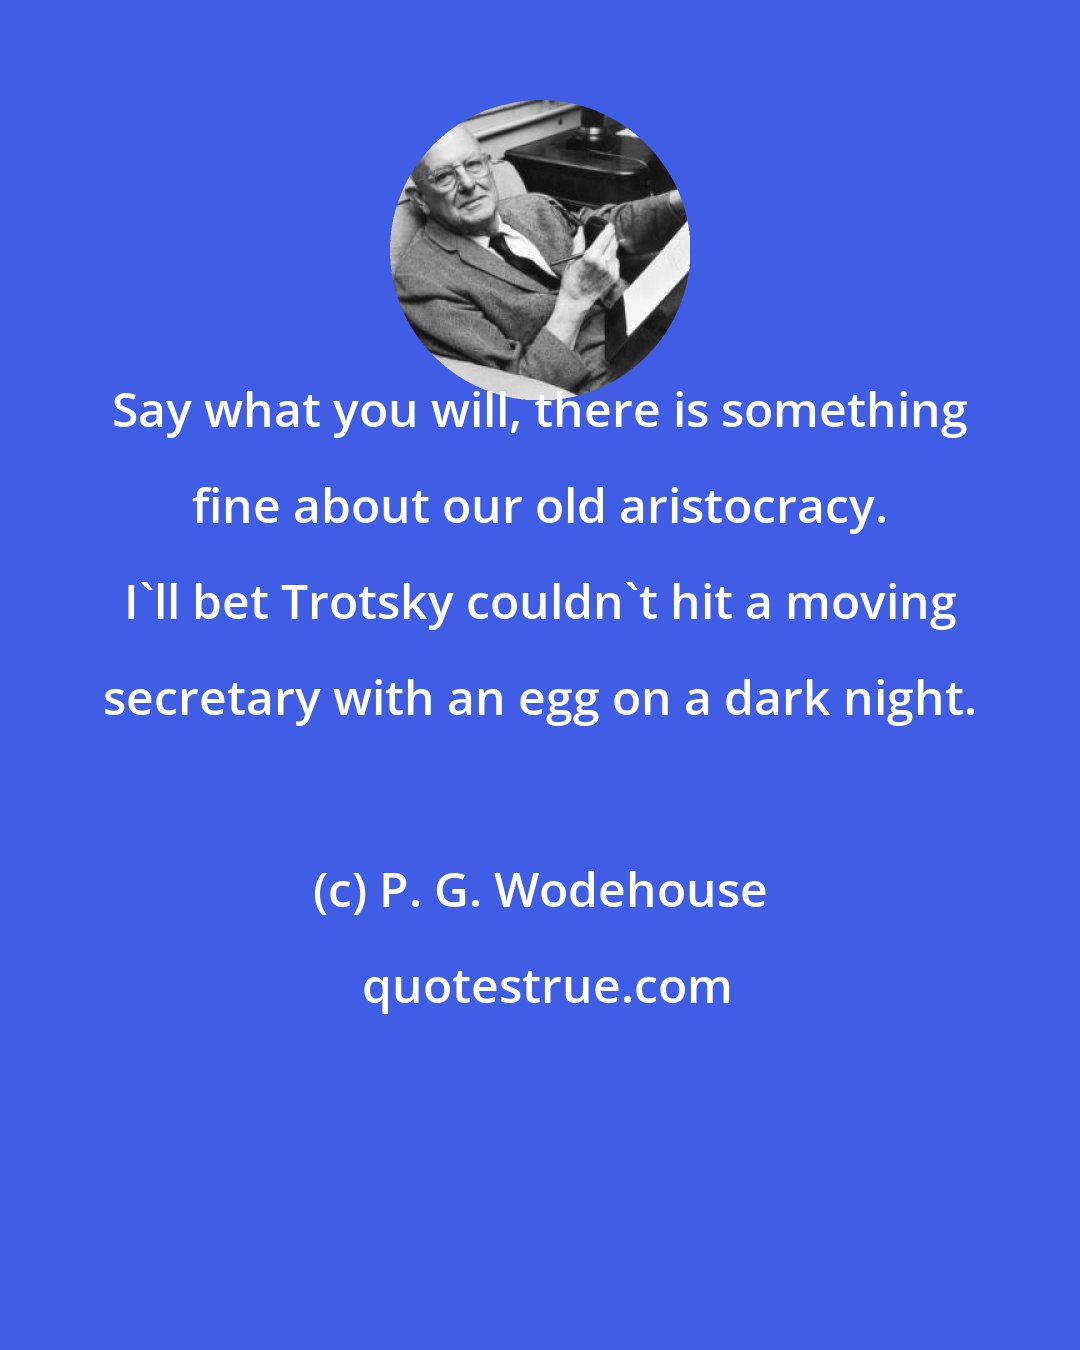 P. G. Wodehouse: Say what you will, there is something fine about our old aristocracy. I'll bet Trotsky couldn't hit a moving secretary with an egg on a dark night.